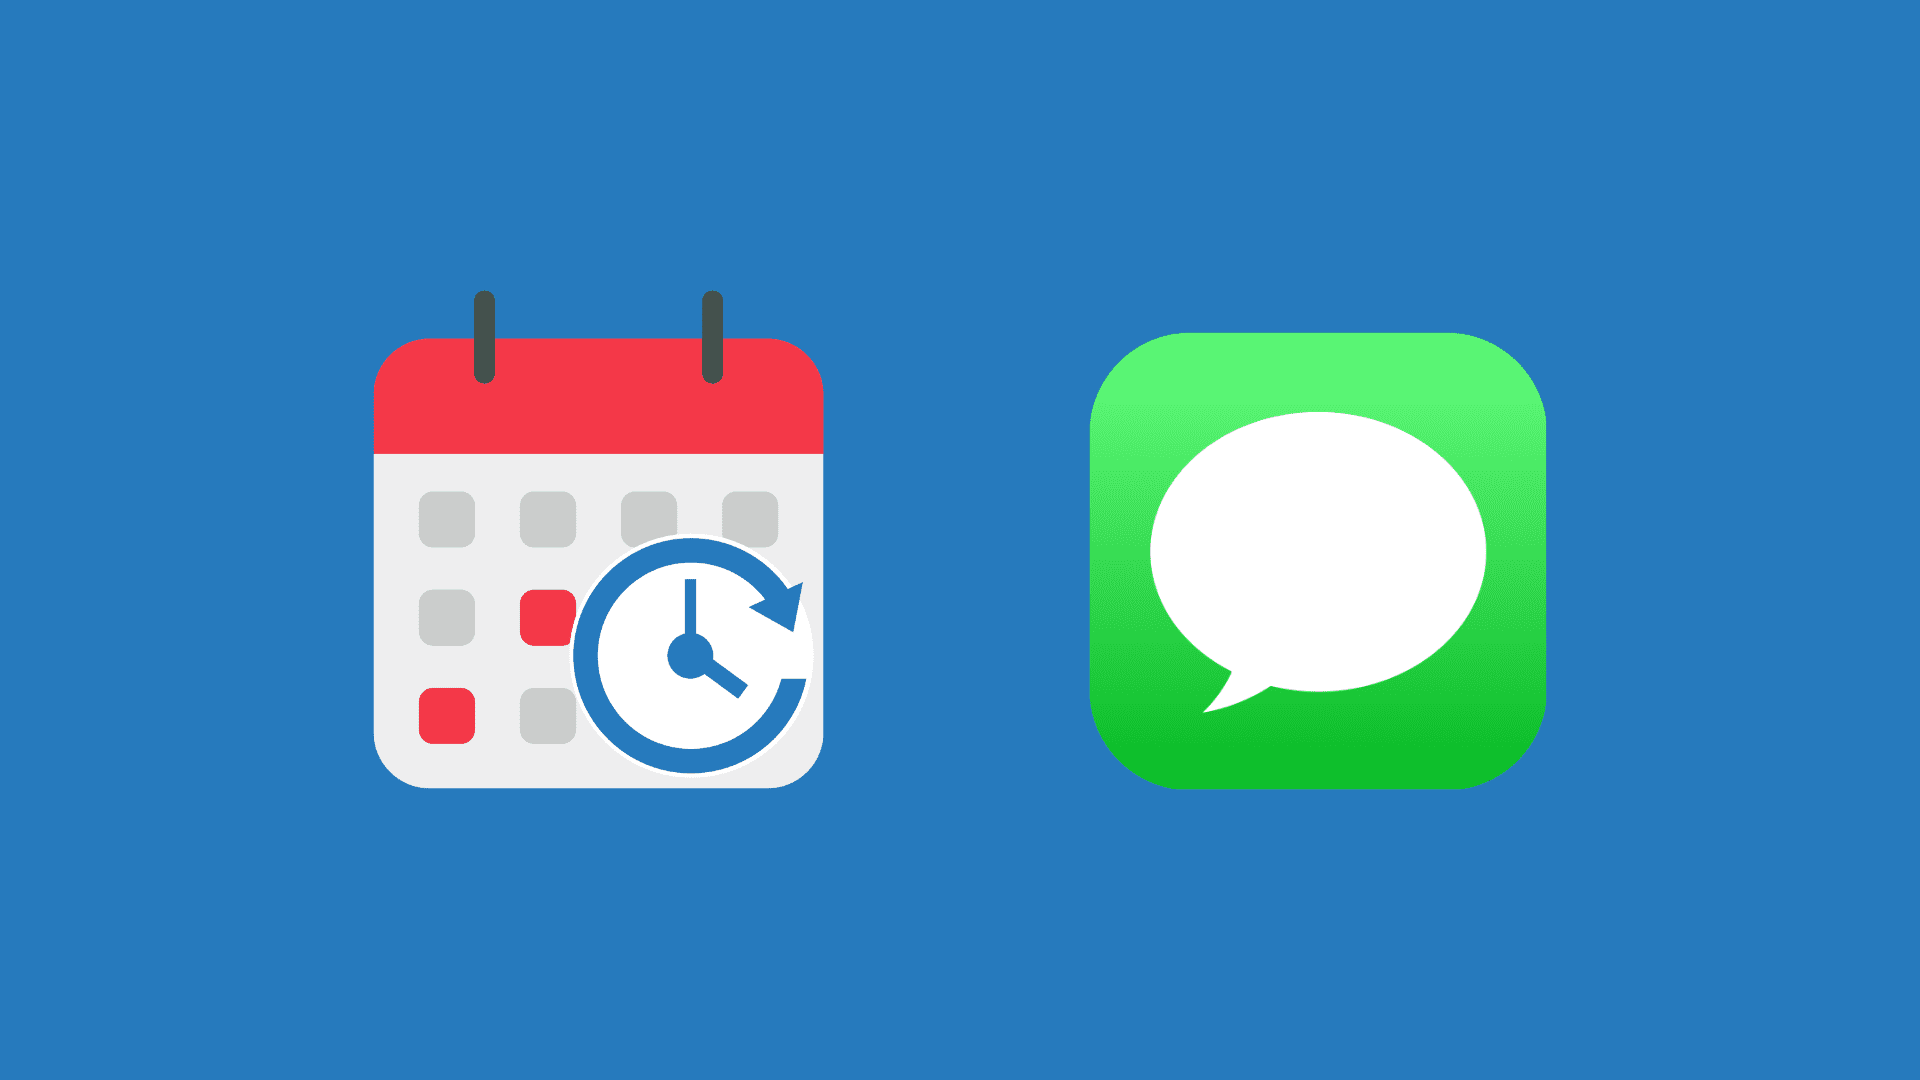 Apple Calendar and Messages app icons on a dark blue background